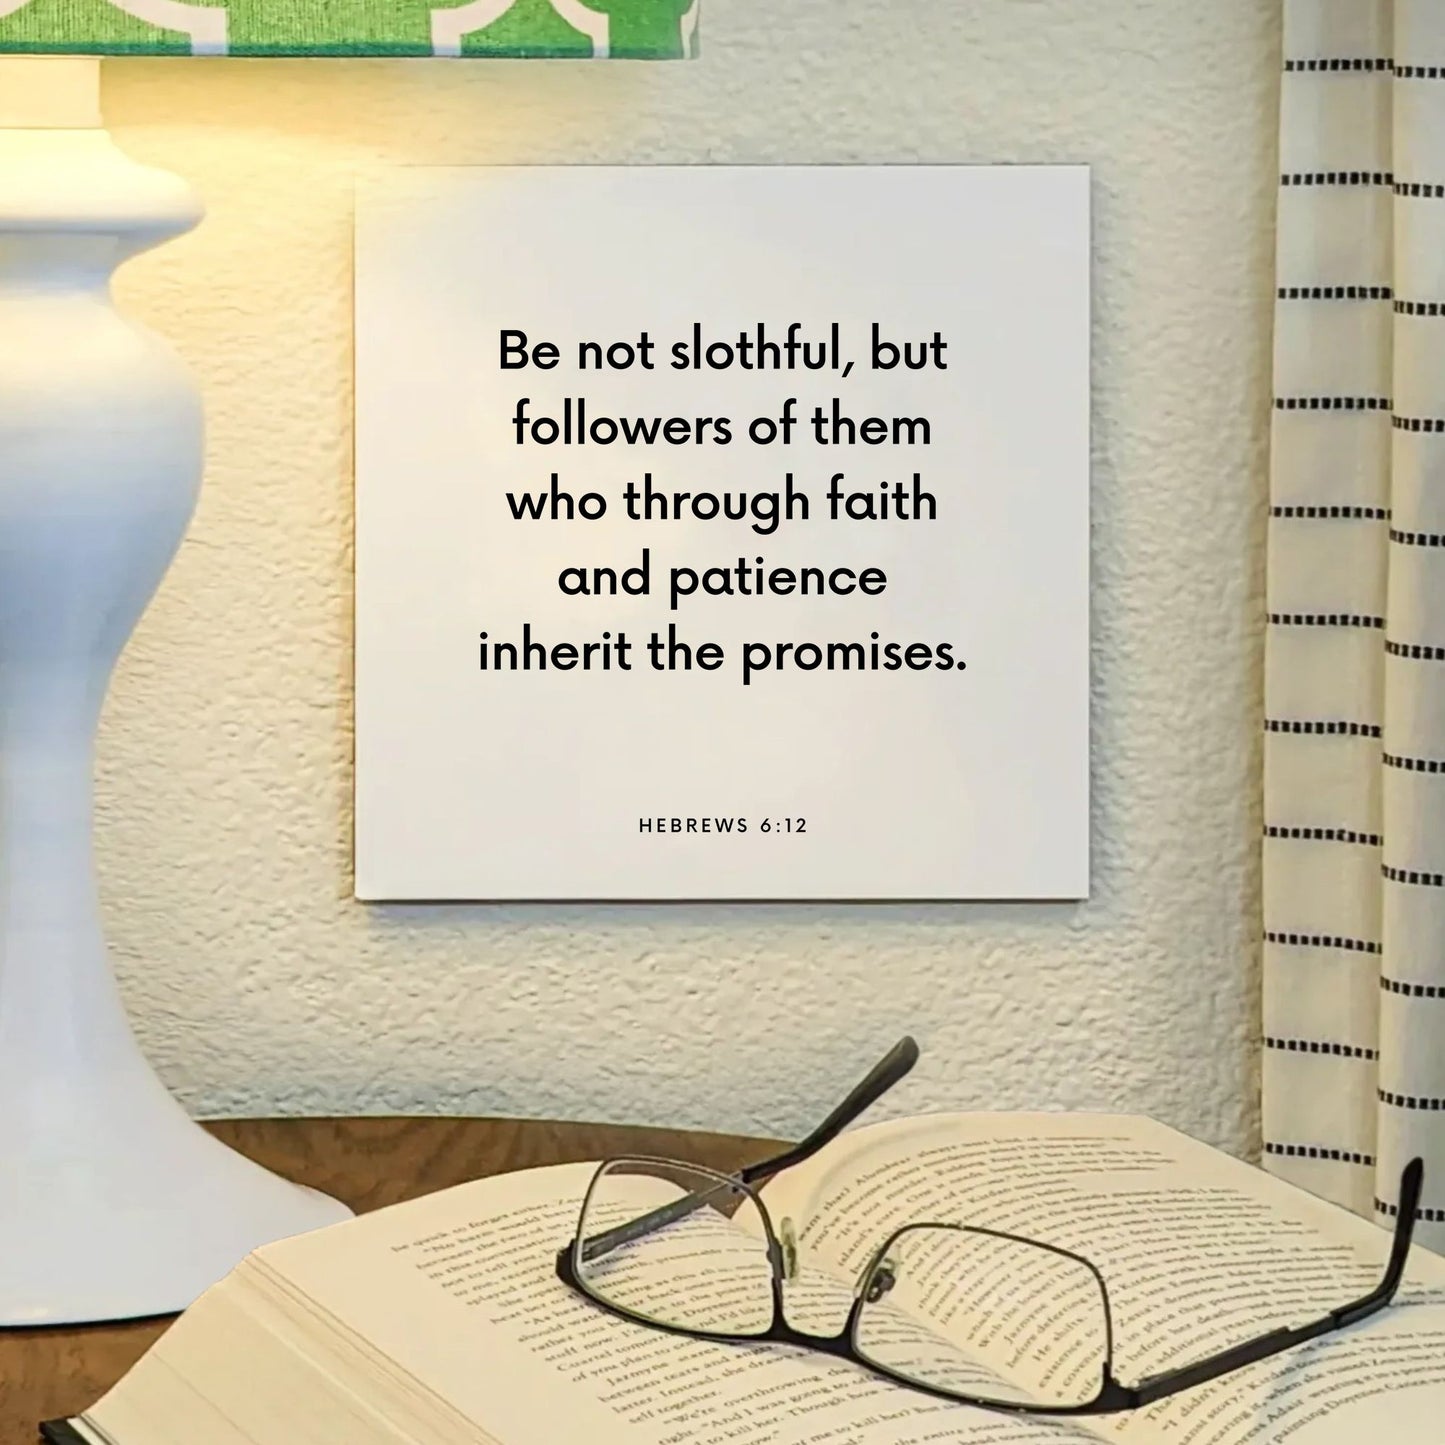 Lamp mouting of the scripture tile for Hebrews 6:12 - "Be not slothful, but followers of them who through faith"